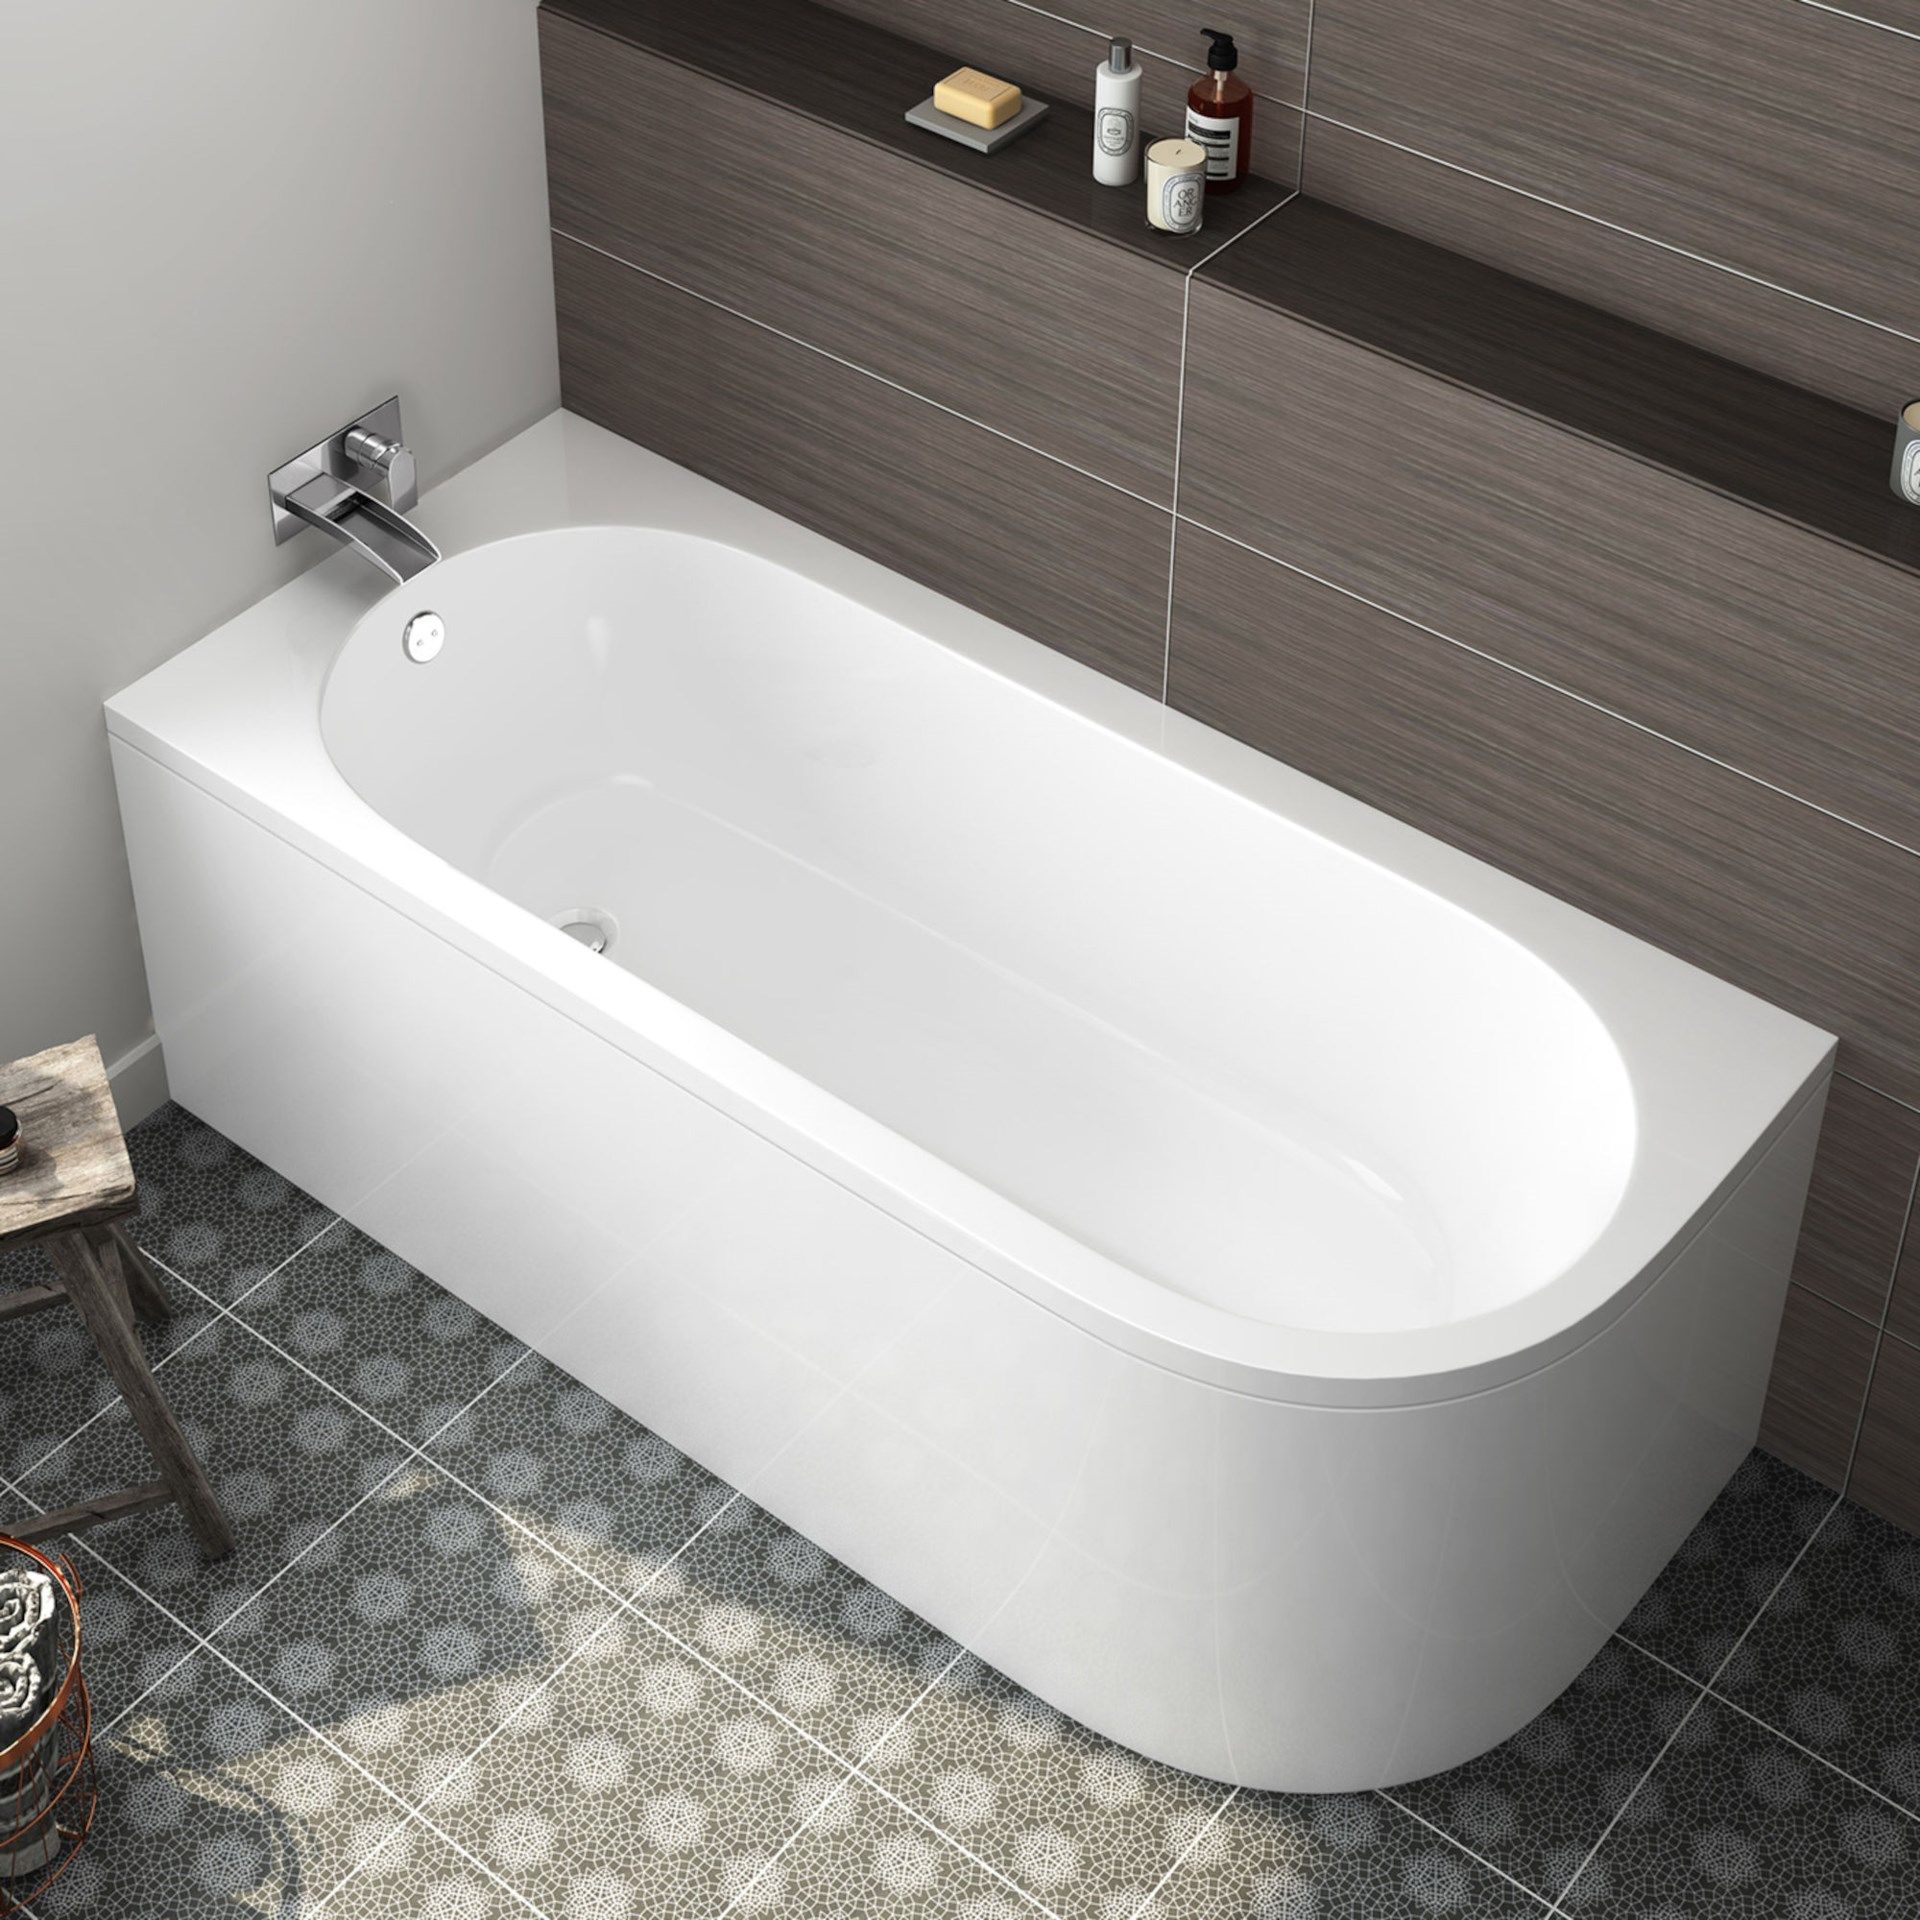 (KL94) 1695x745mm Denver Corner Back to Wall Bath (Includes Panels) - Left Hand. RRP £499.99. Double - Image 4 of 4